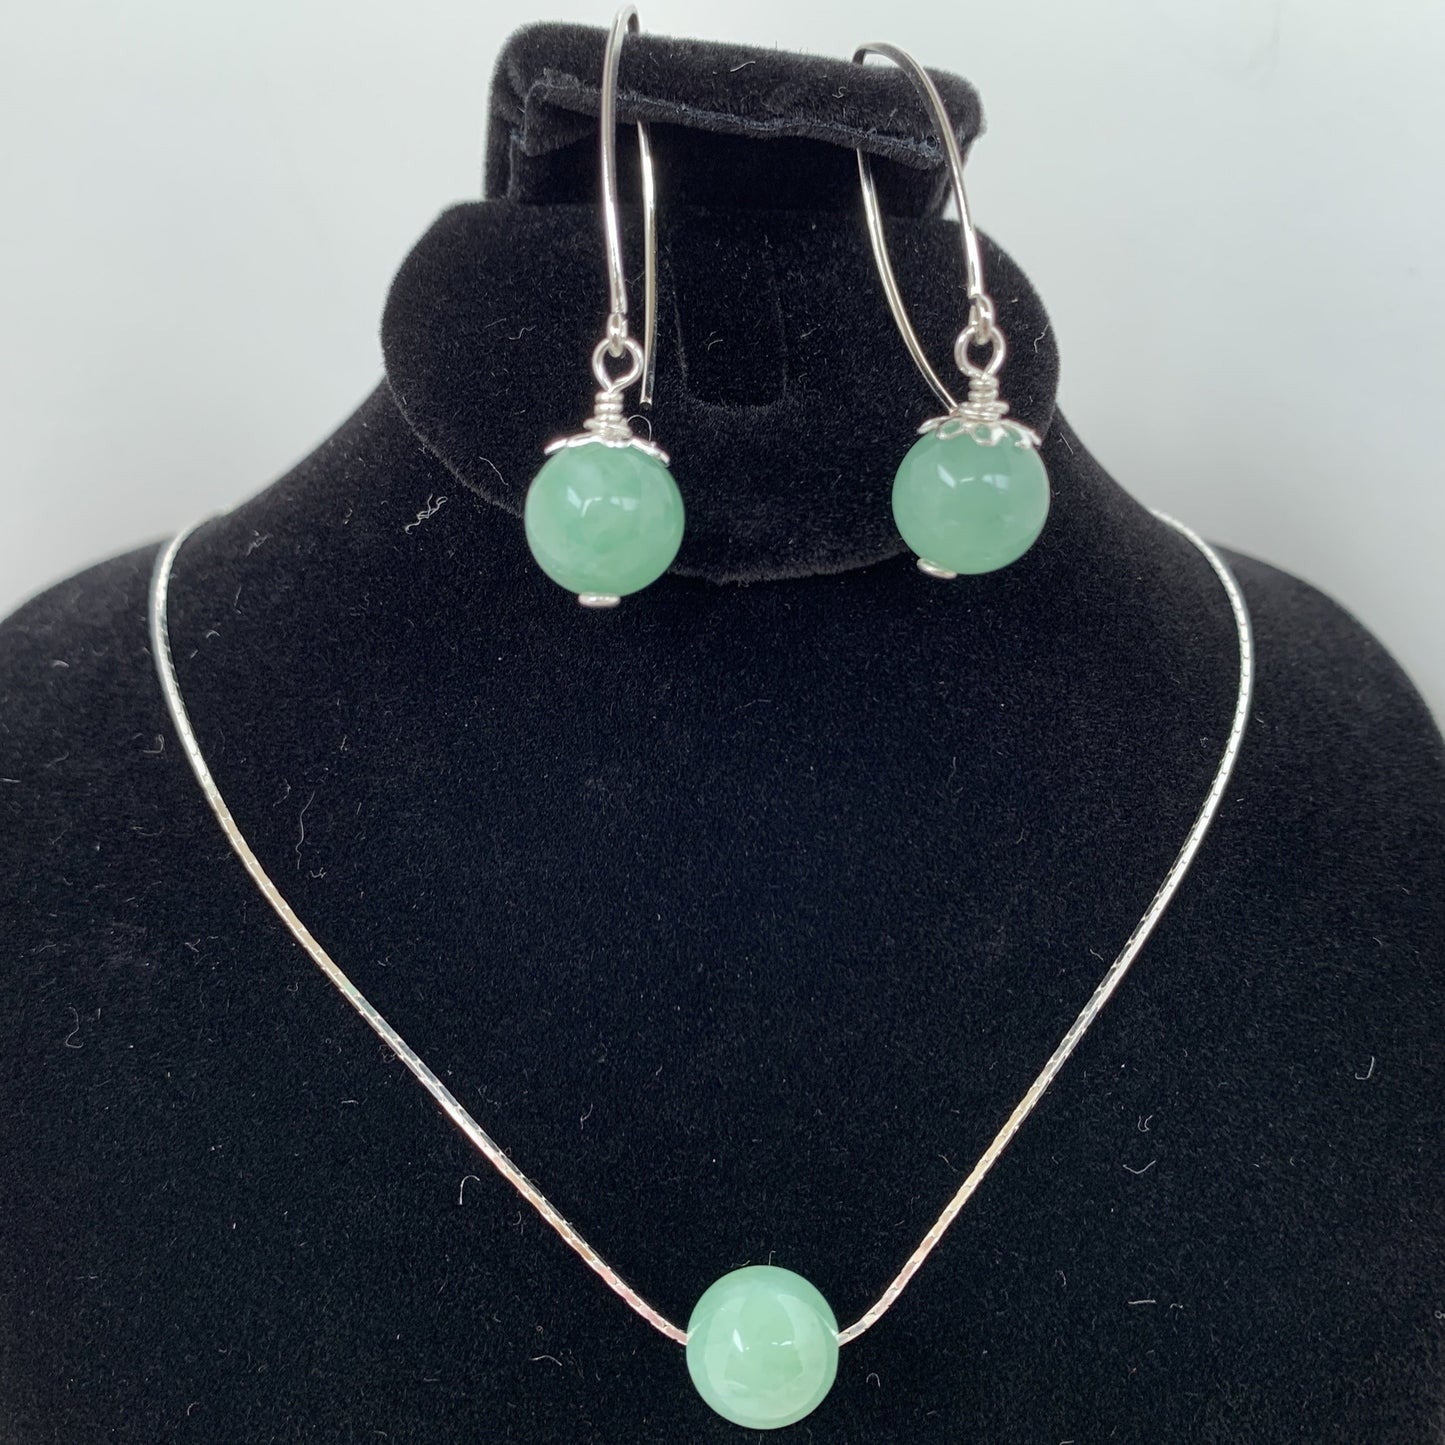 10mm AAA natural burma jade on sterling silver chain and earrings set